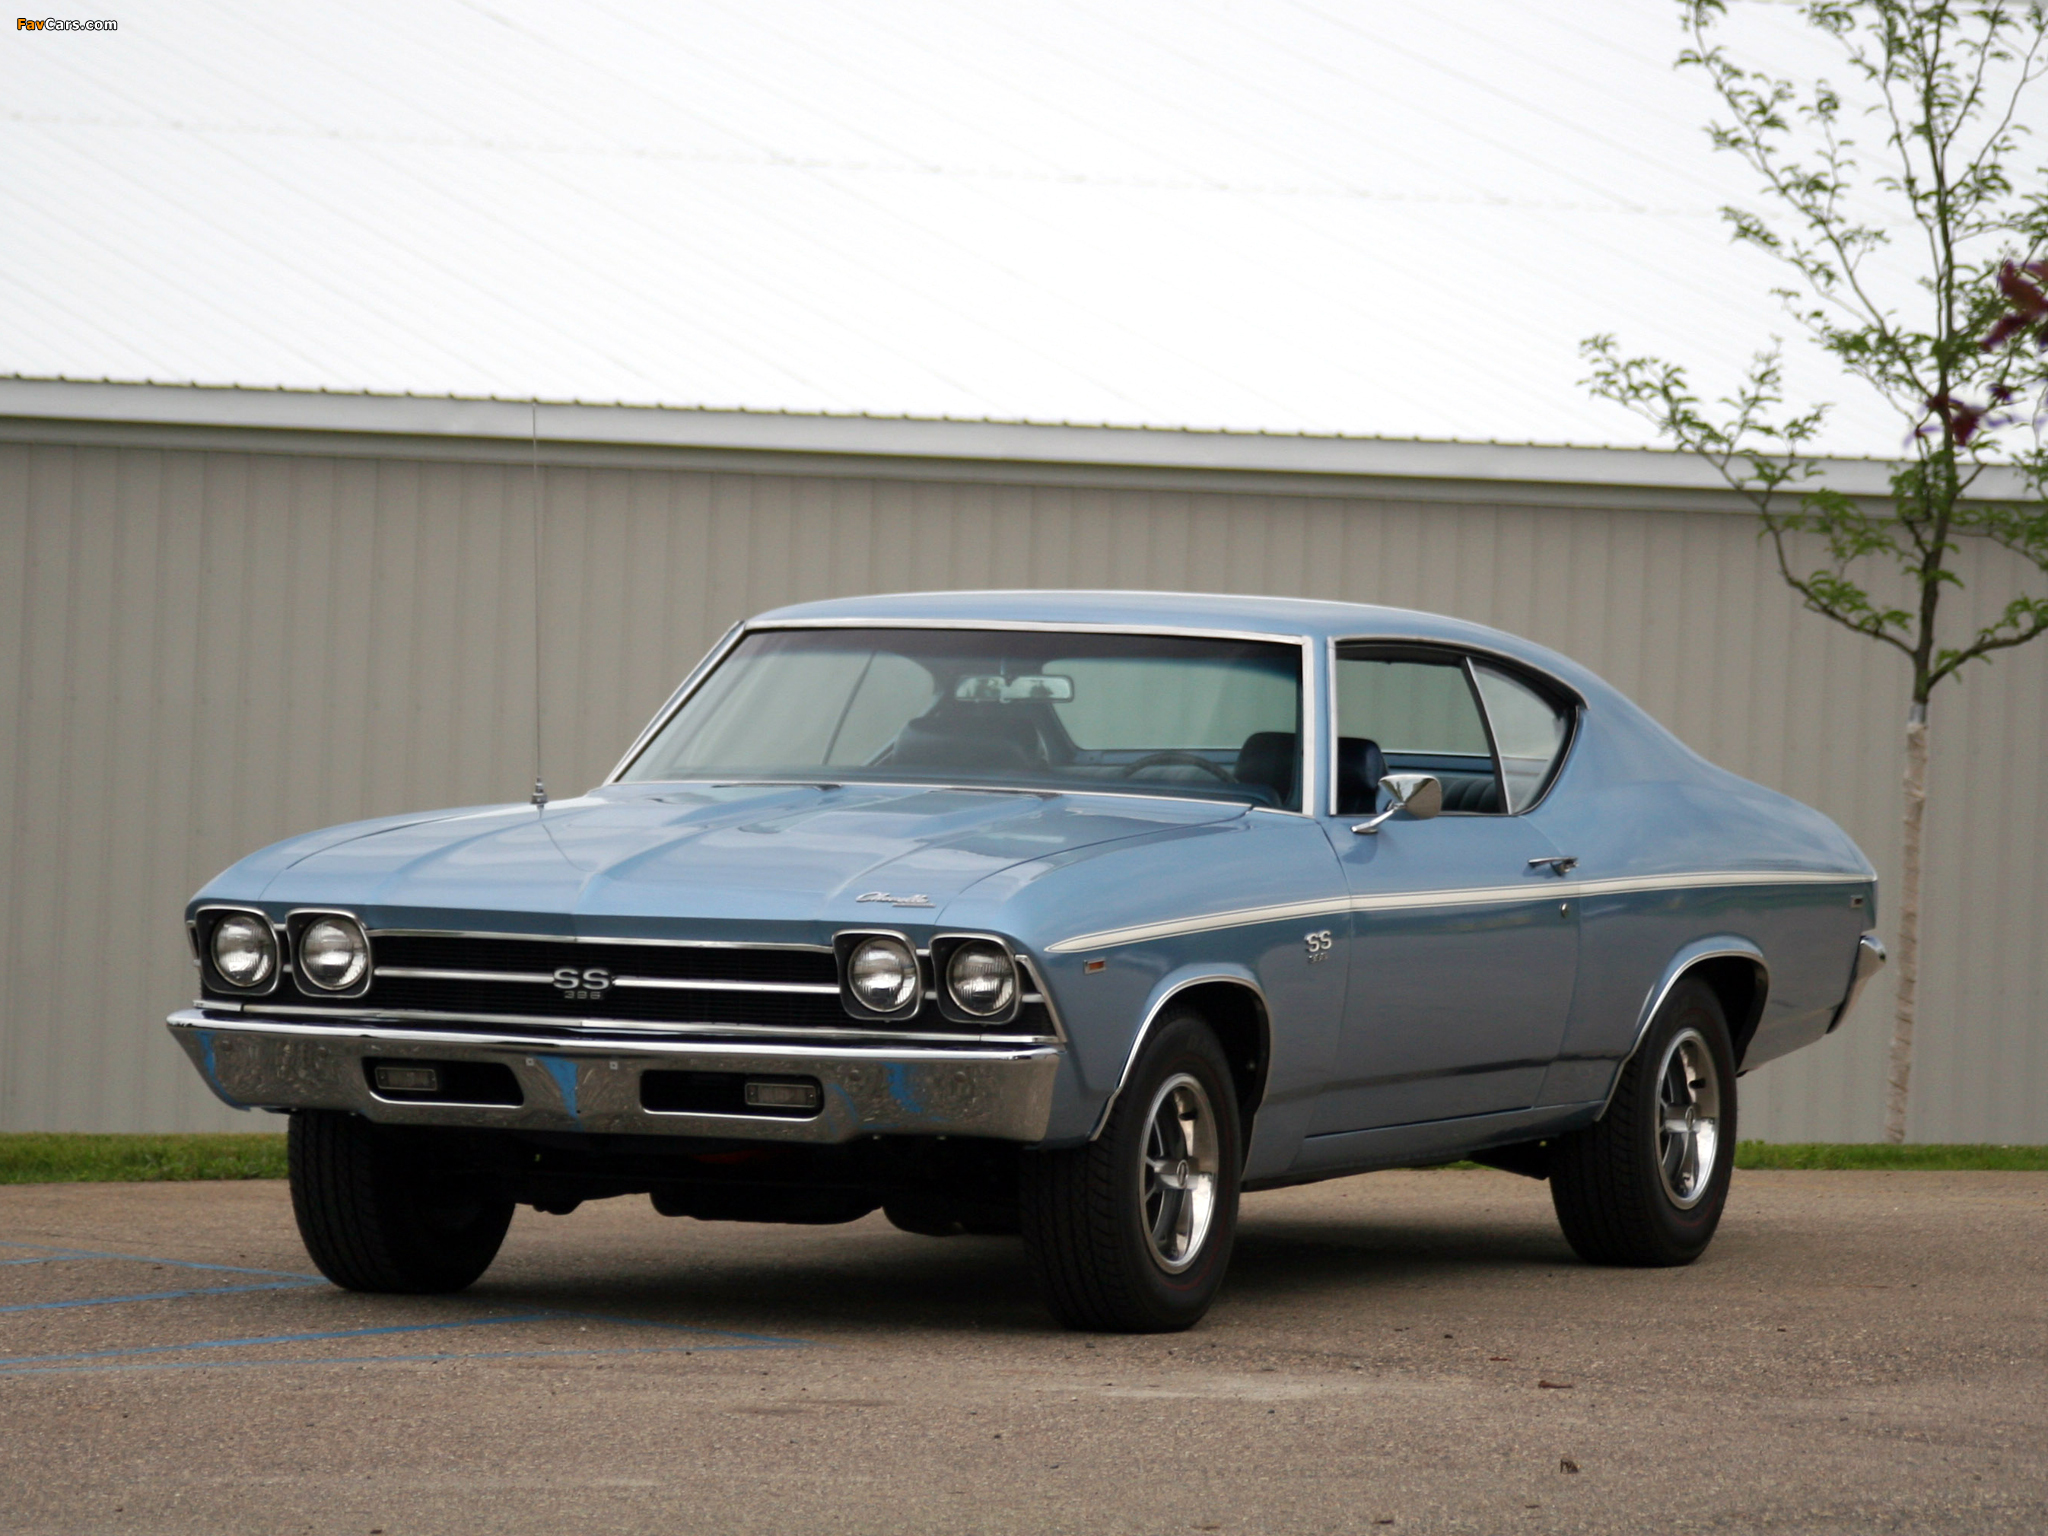  chevelle ss 396 hardtop coupe 1969 wallpapers 2048 x 1536 Car Pictures